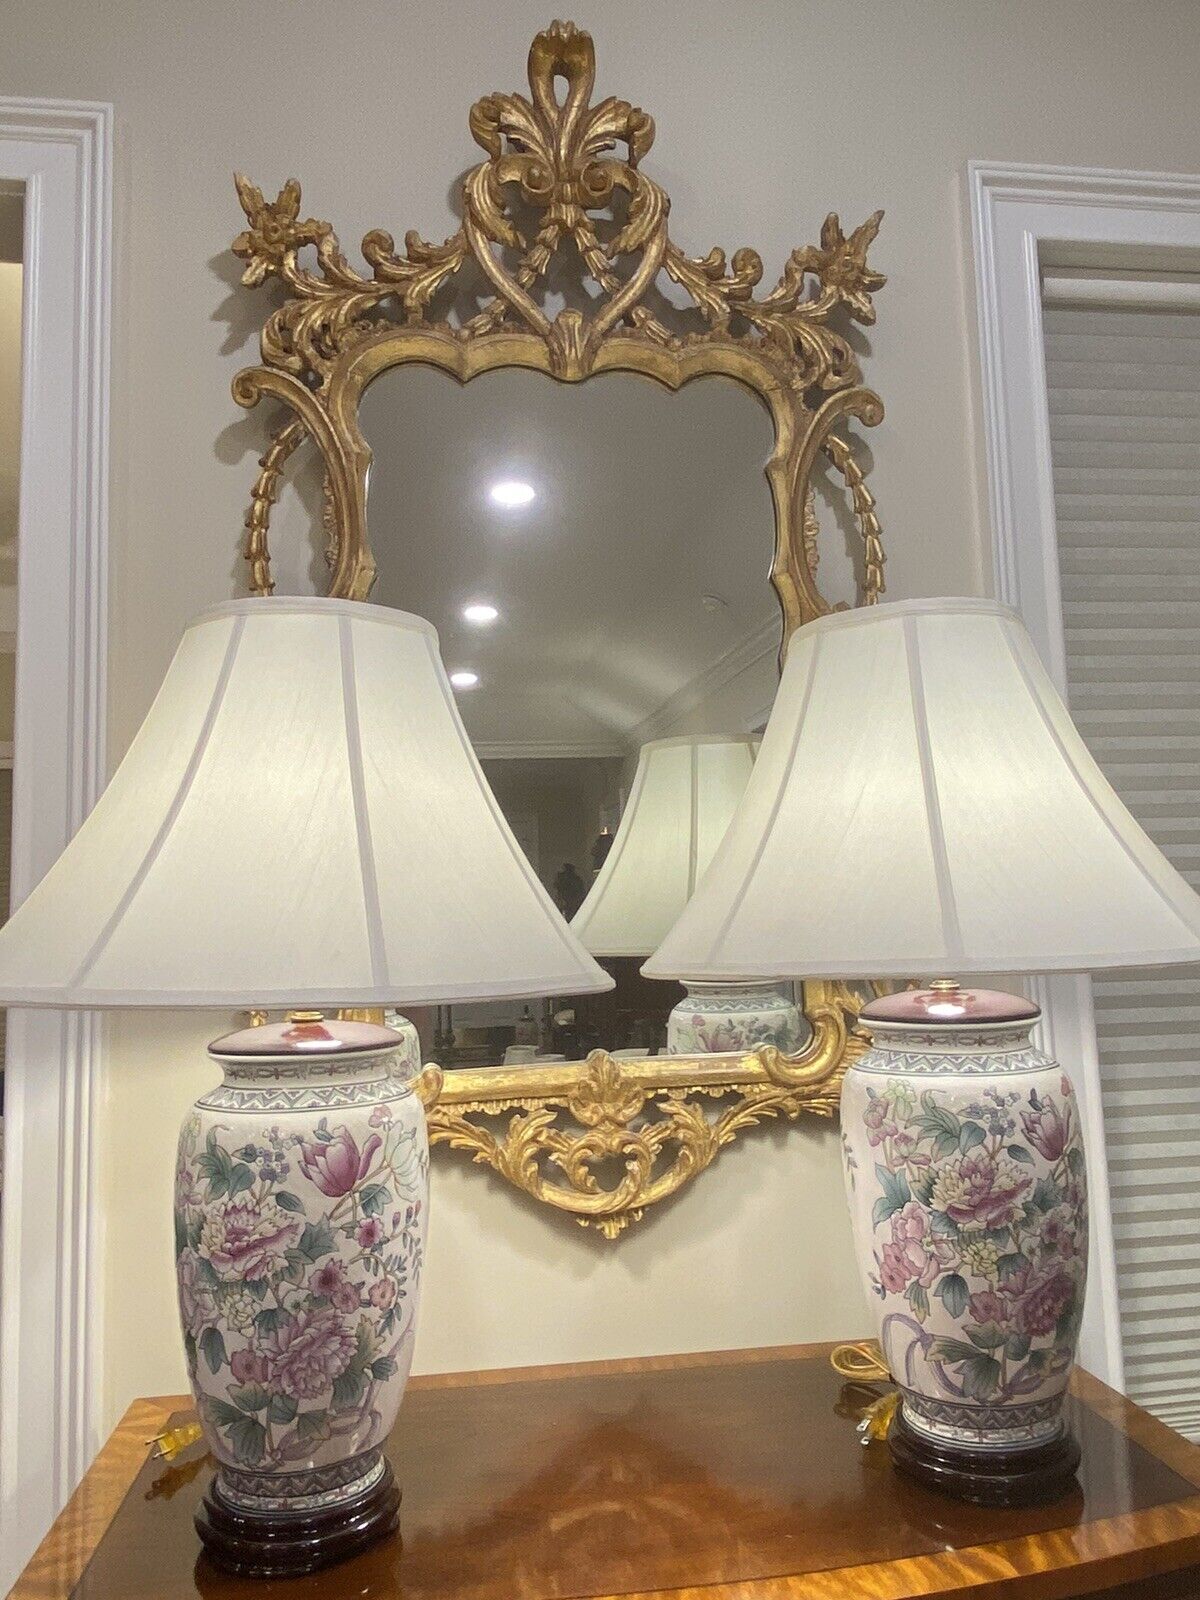 Pair of Moriage Hand-Painted Chinese Porcelain Lamps: Floral Bouquets w/Ribbons